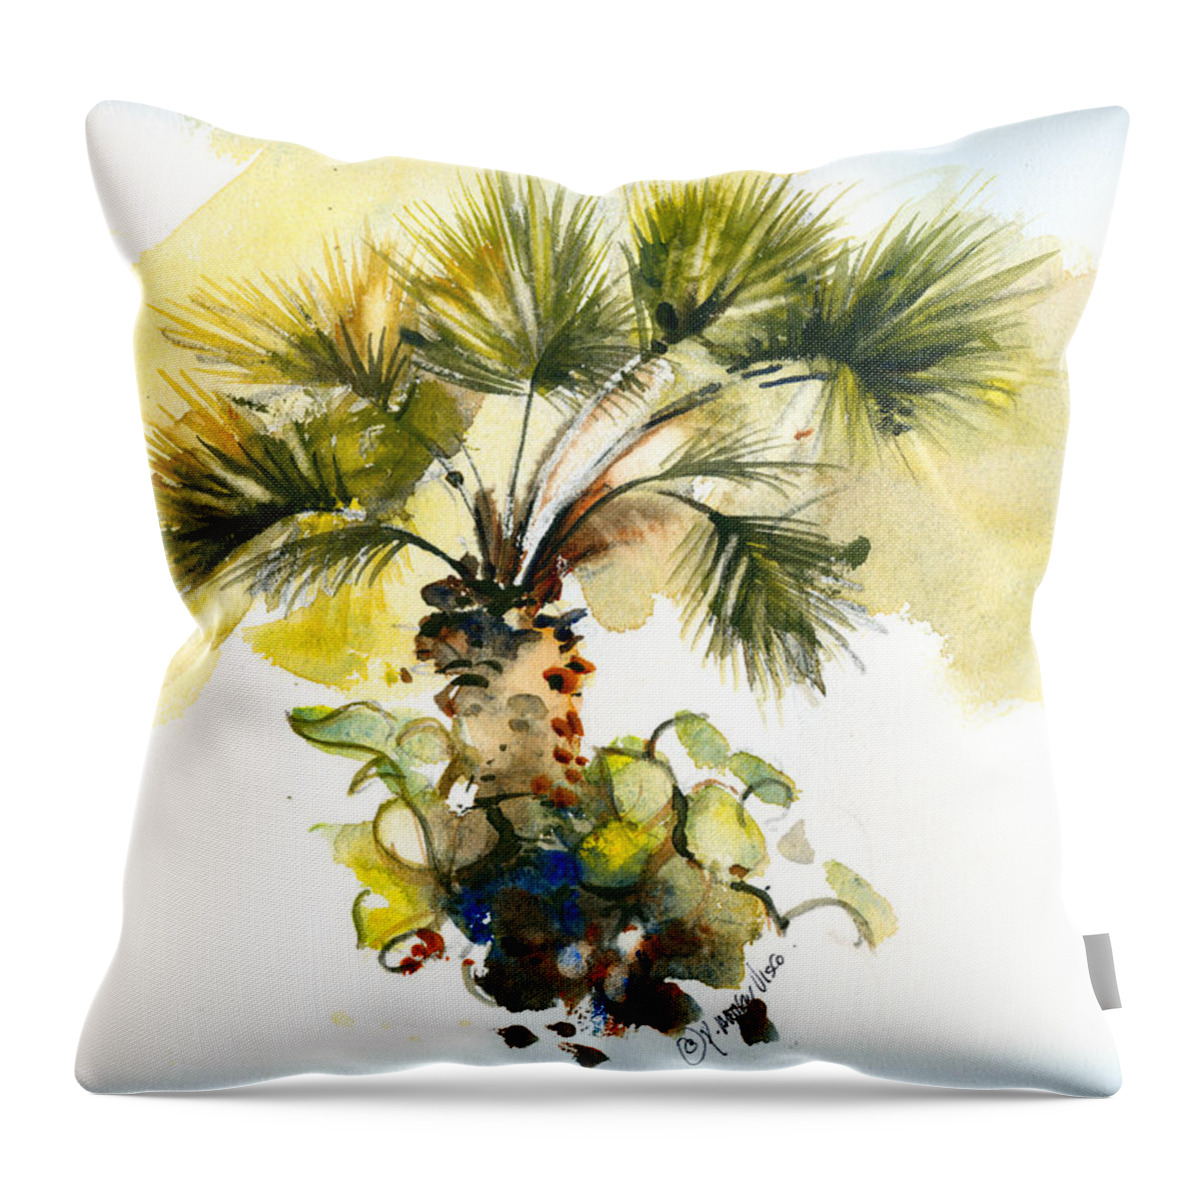 Plymouth Ma Artist Throw Pillow featuring the painting Frorida Fan Palm by P Anthony Visco